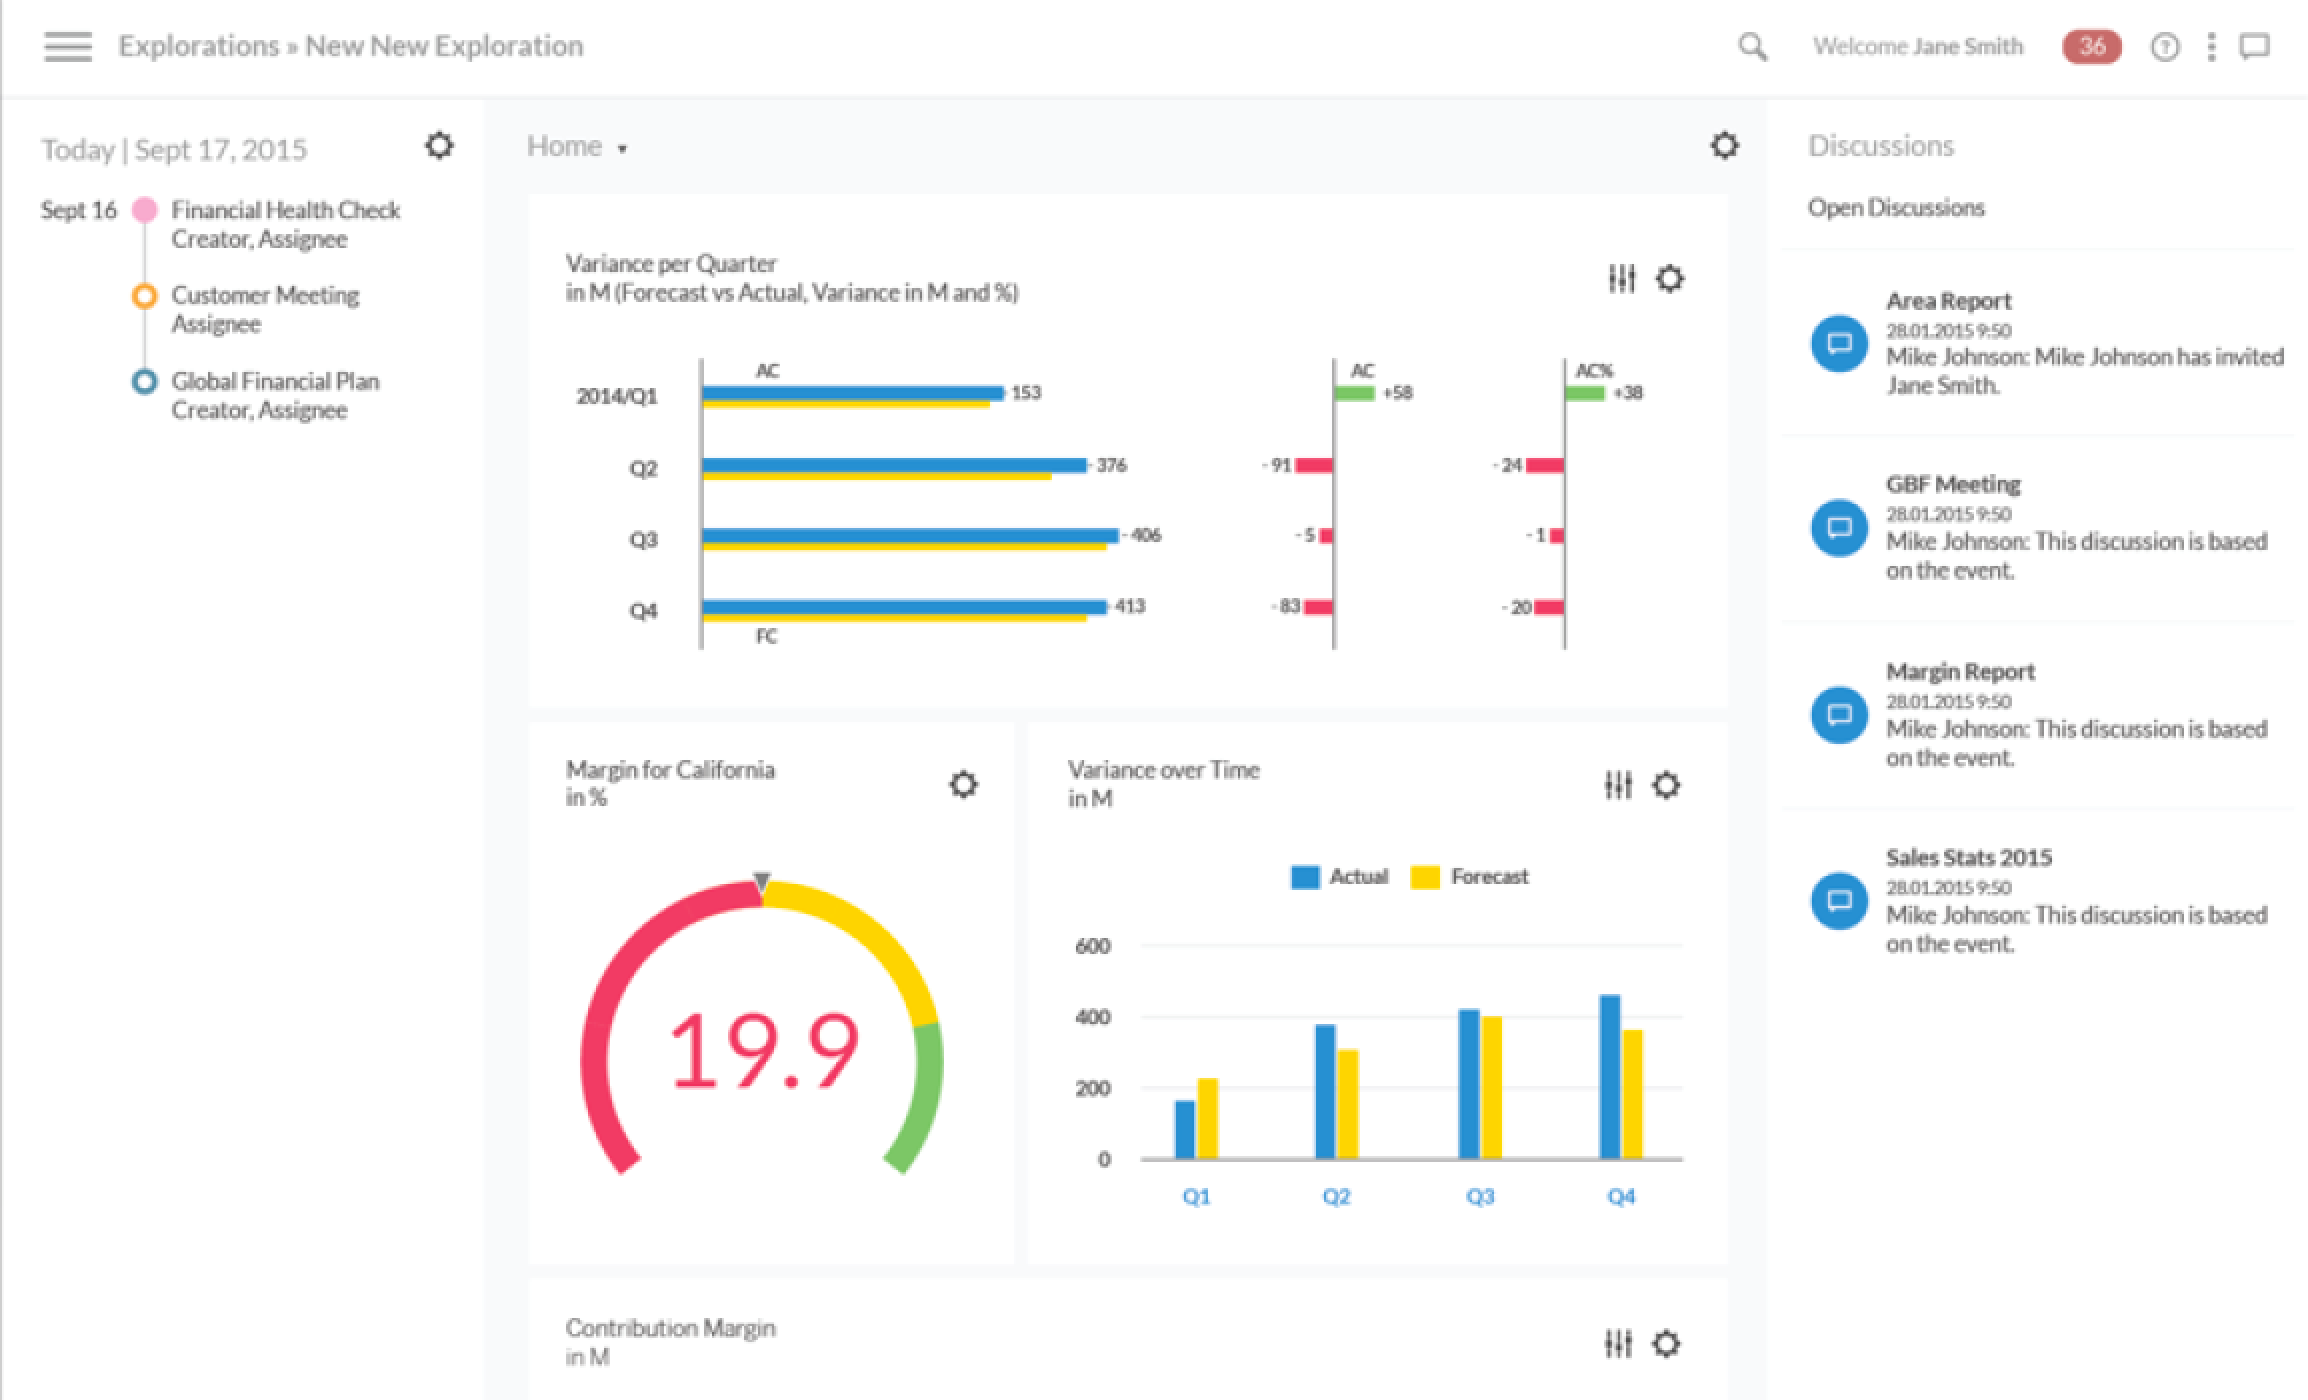 SAP Analytics Cloud Software - SAP Analytics Cloud showing redesigned UI and discussions